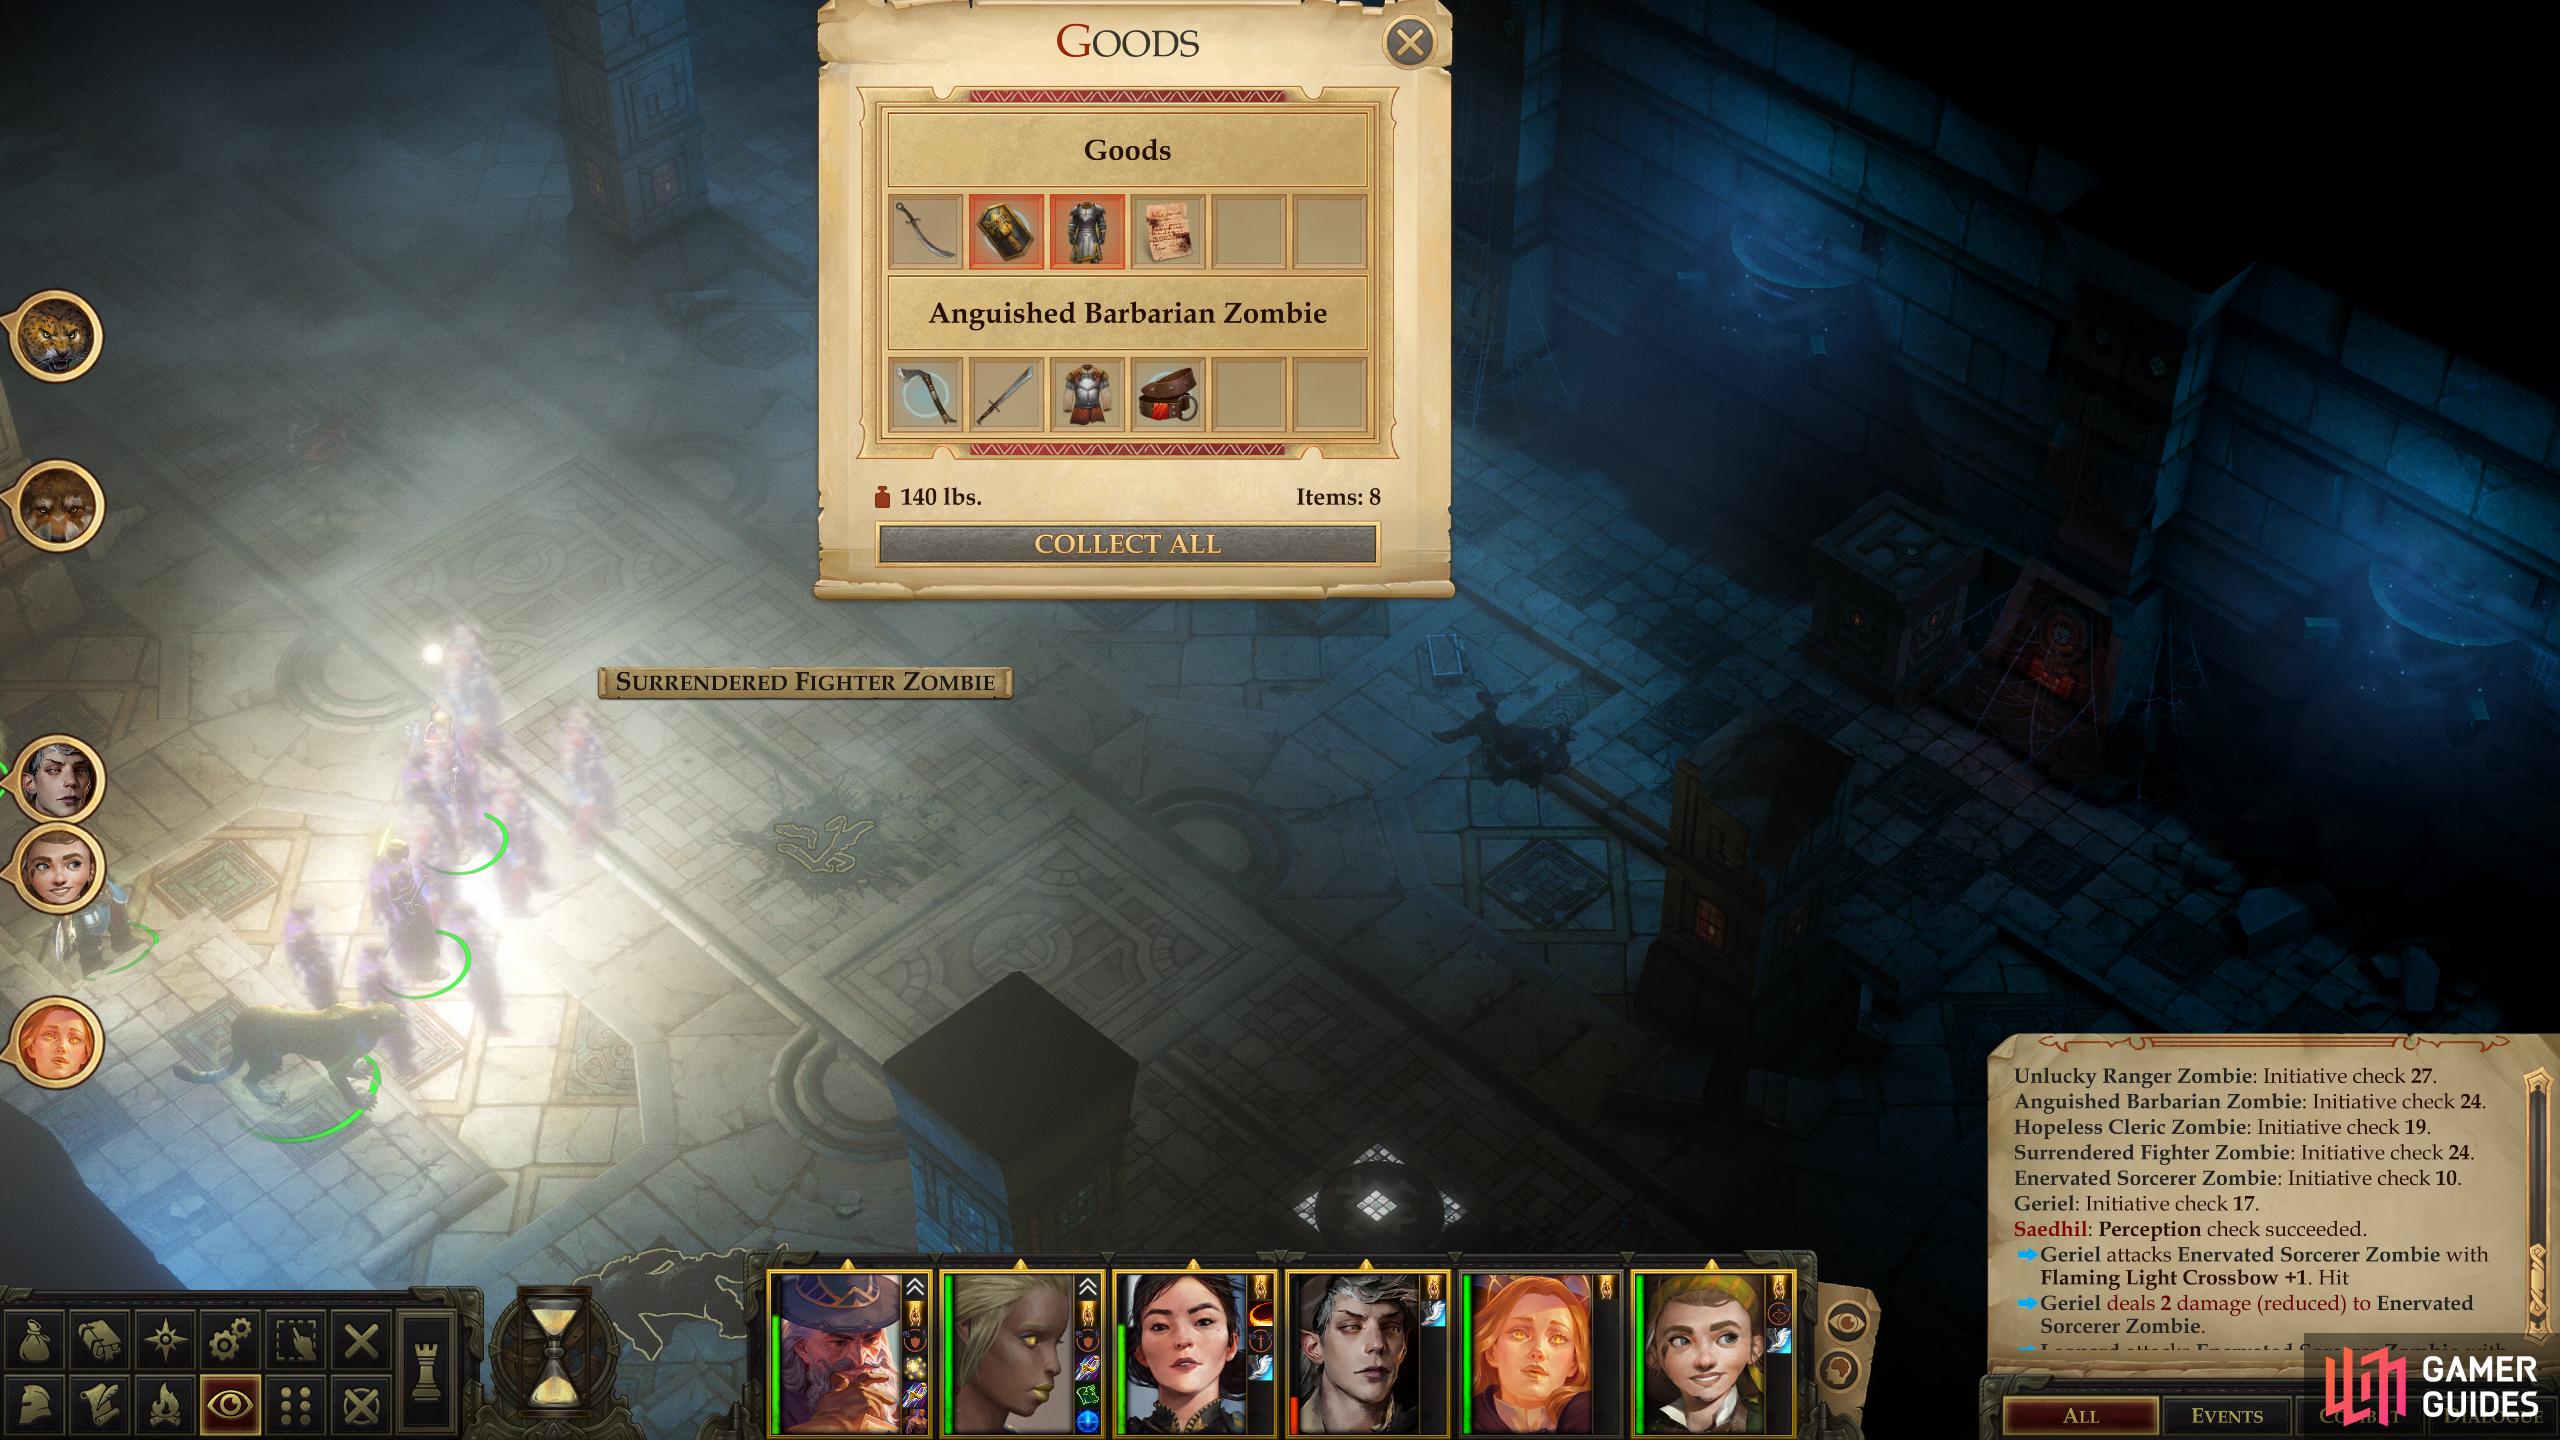 Dispatch a group of undead adventurers and loot one for "Penrod Hanvaki's Letter".